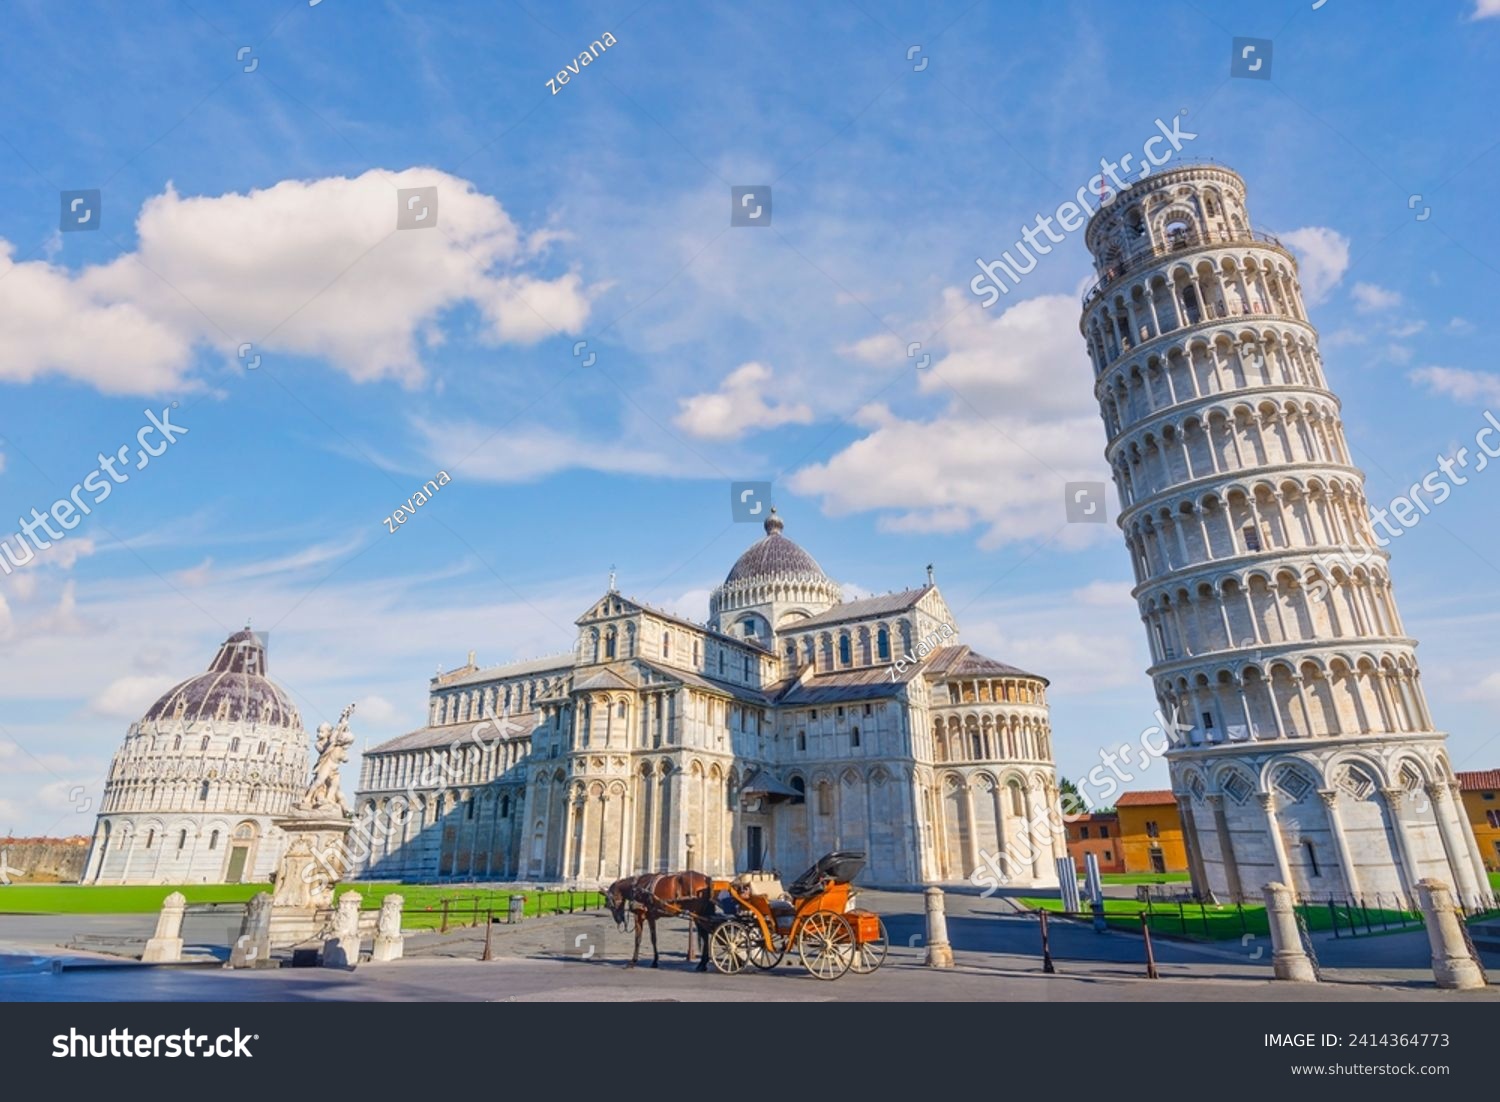 Horse with carriage on the square with Pisa leaning tower and cathedrals, Italy #2414364773